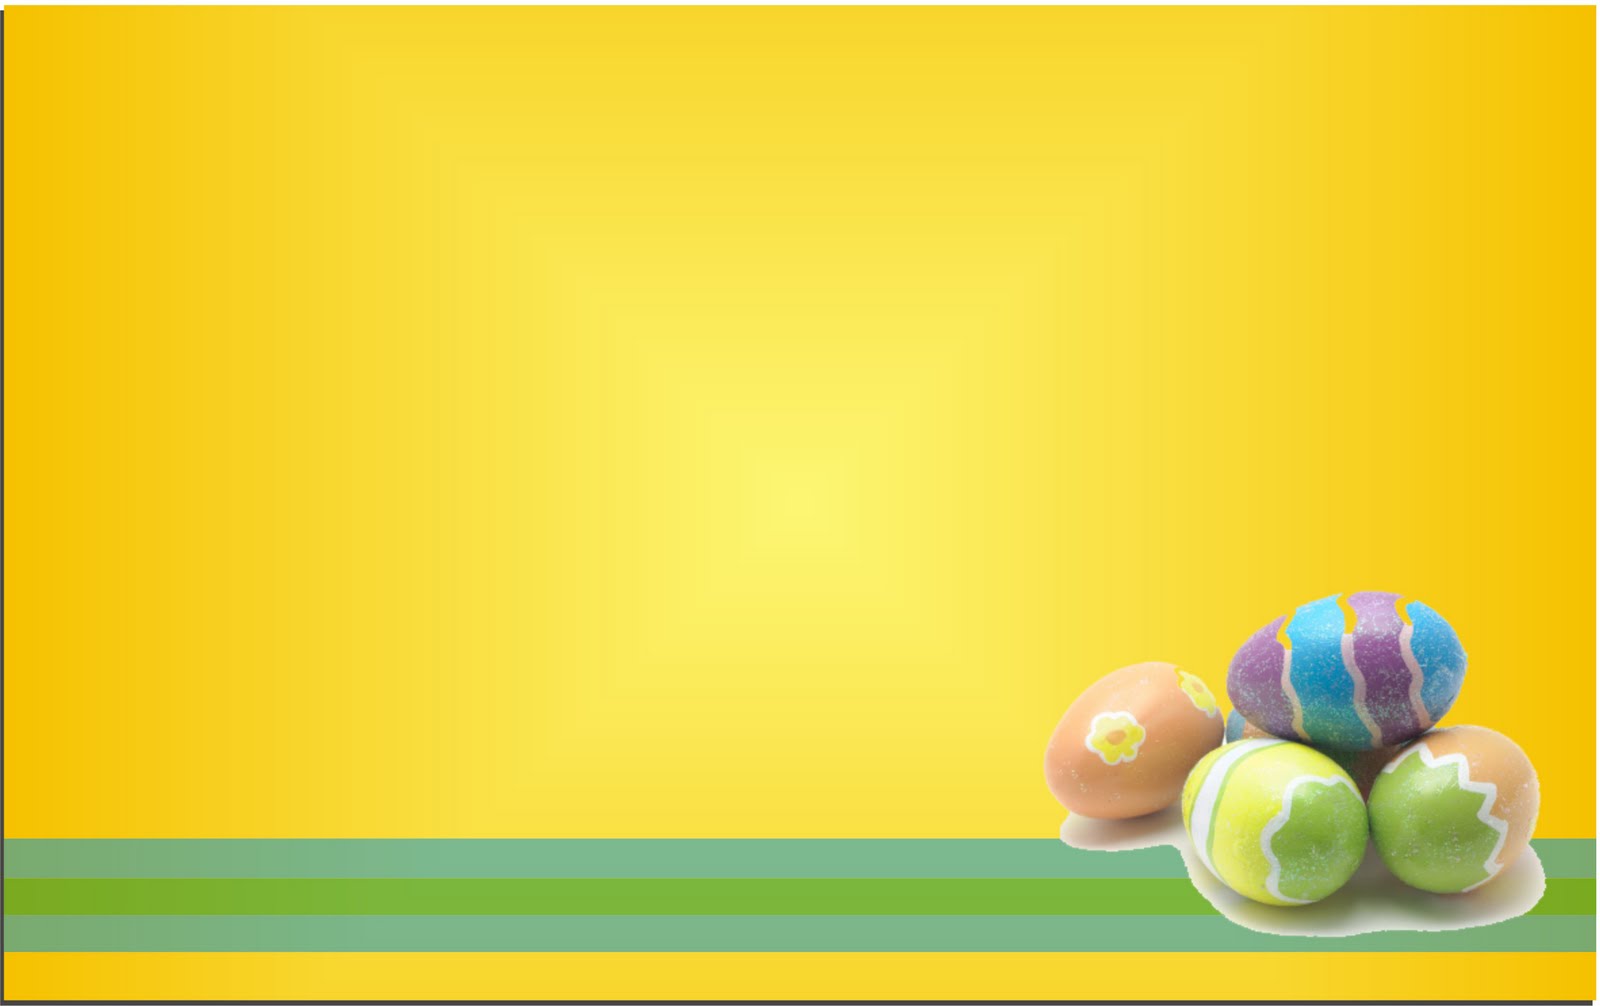 Happy Easter wallpapers